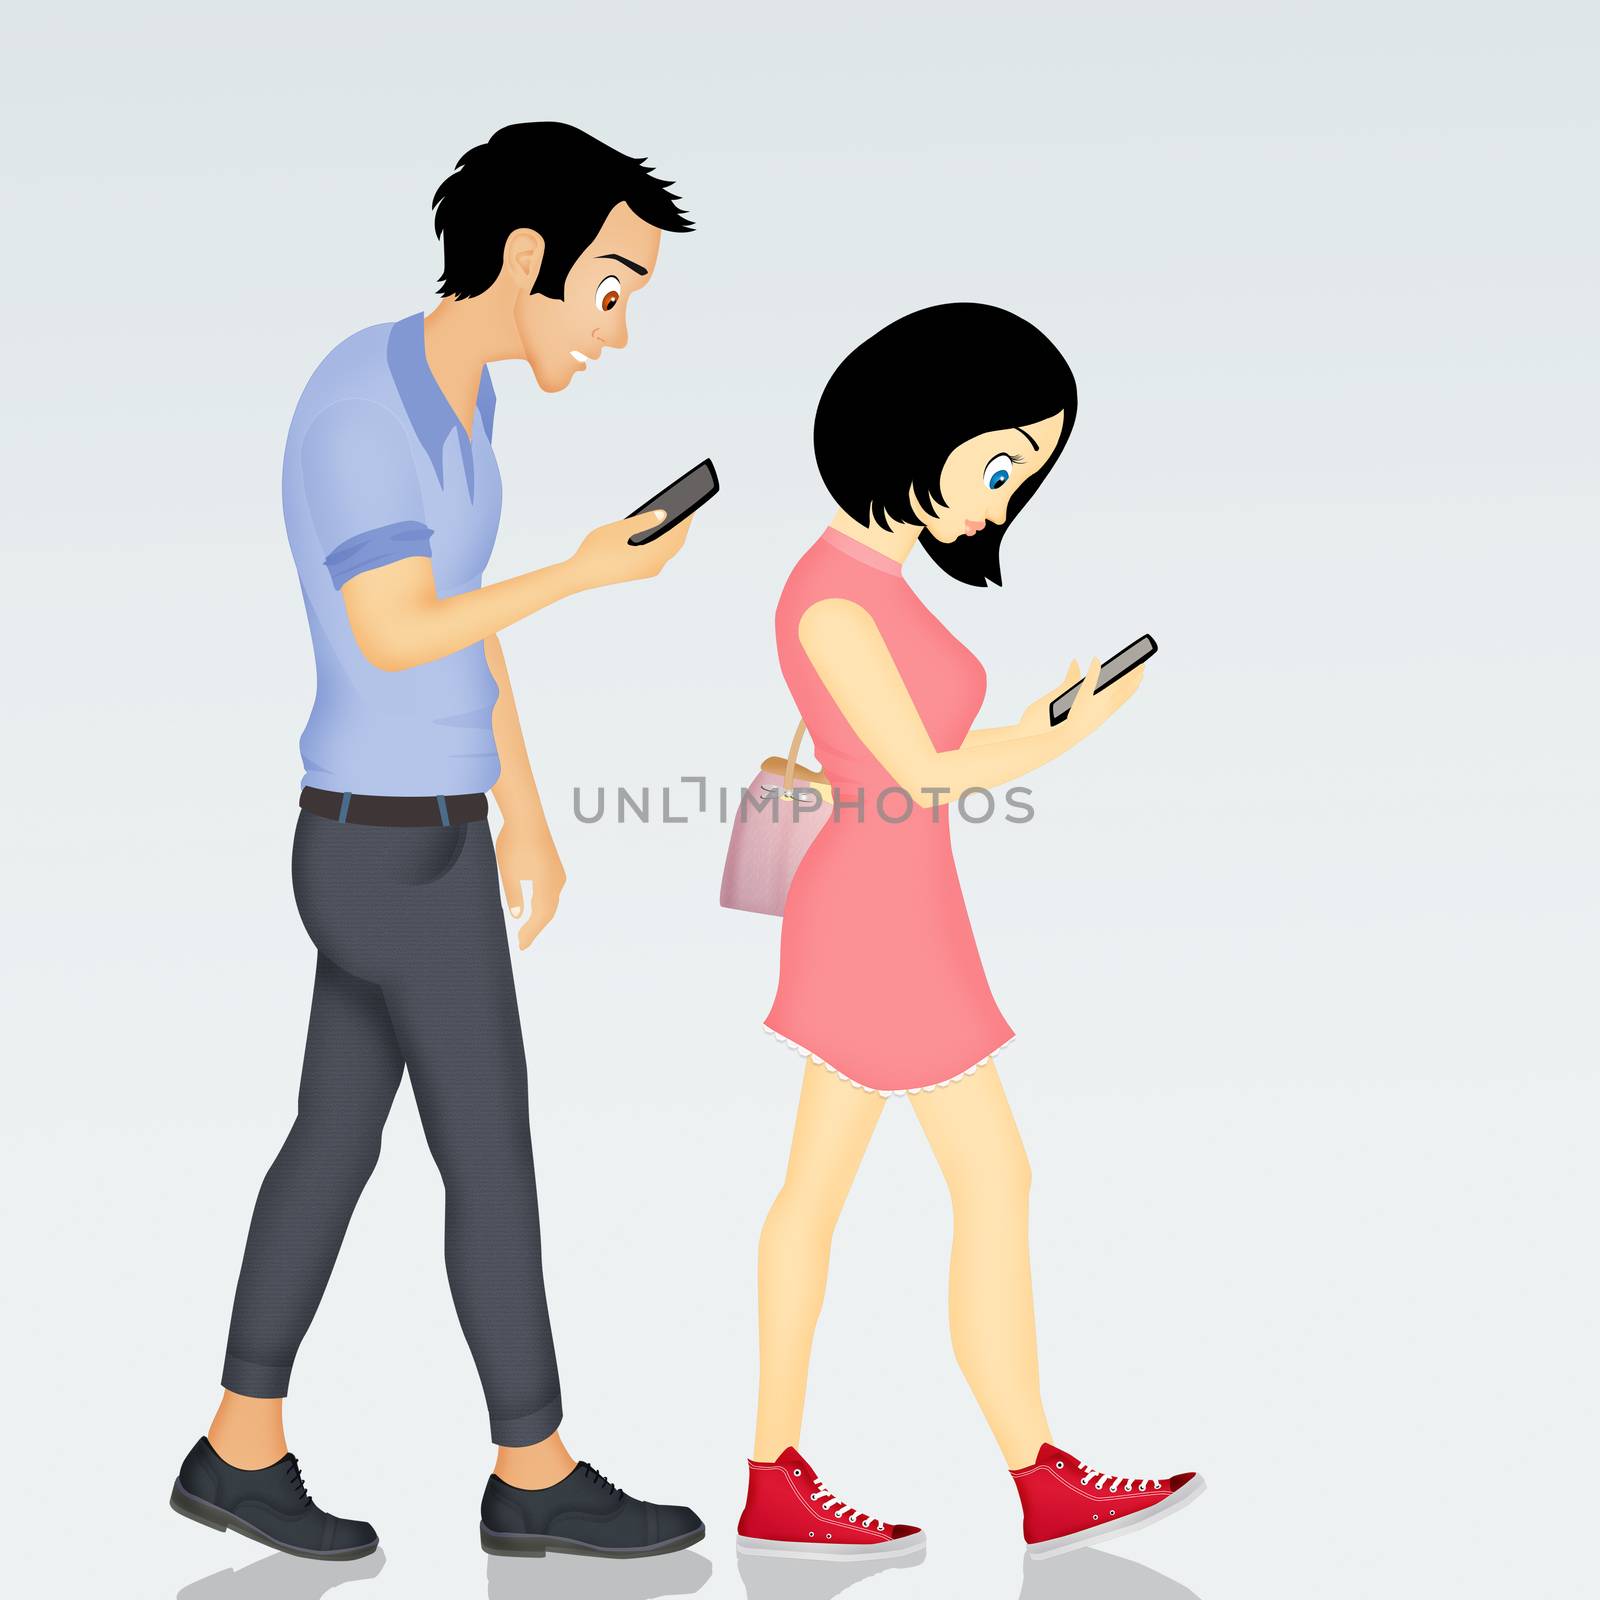 illustration of people walking with smartphones